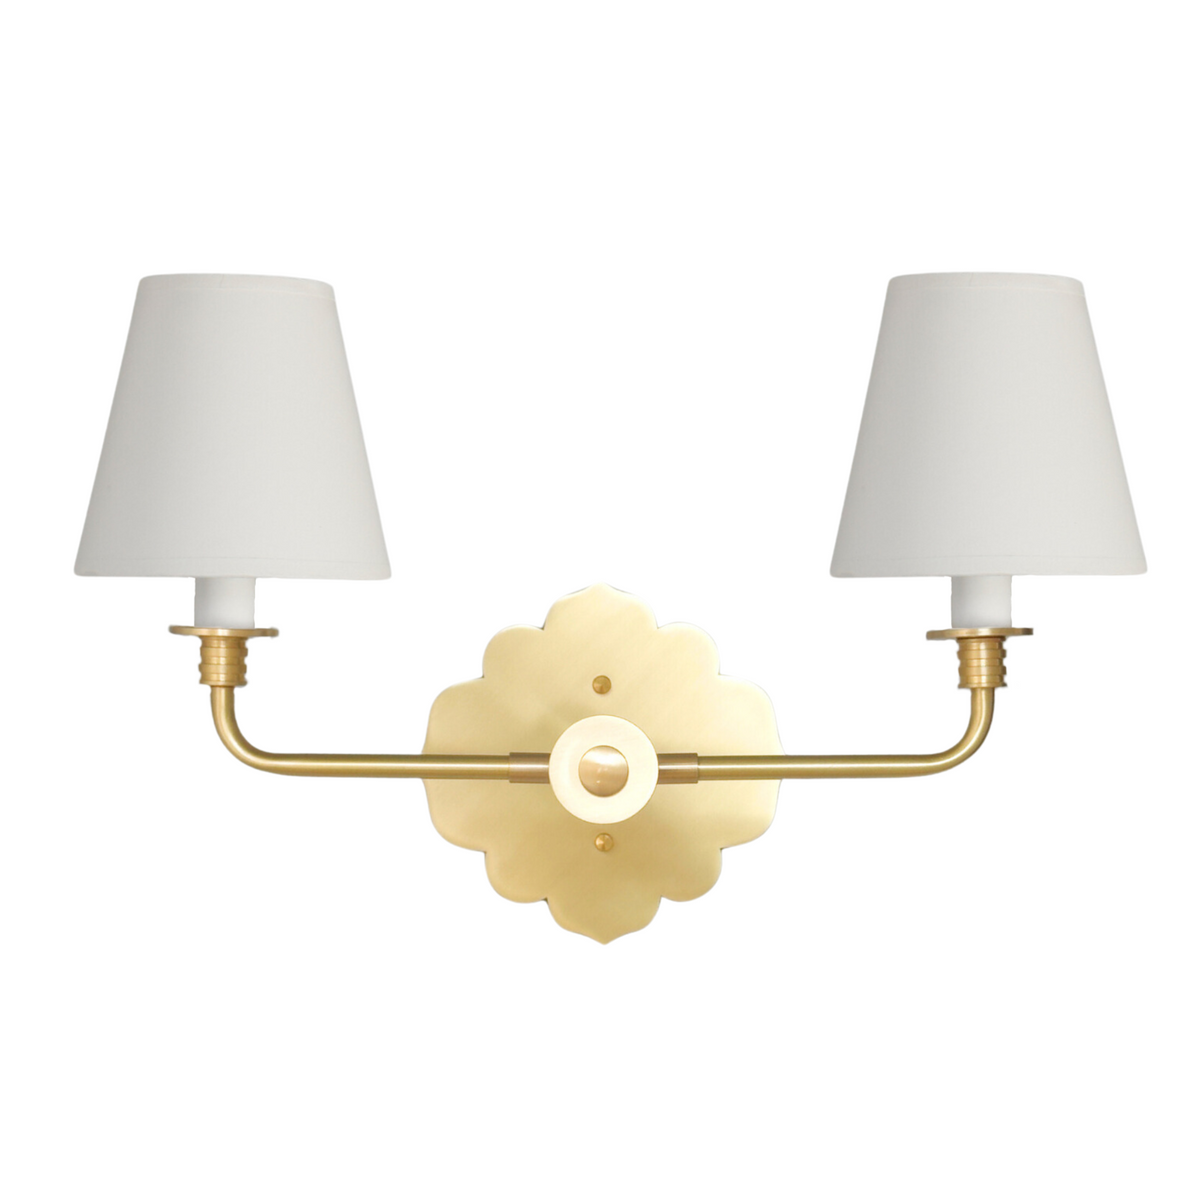 Helios Double Candlestick Sconce in Hewn Brass